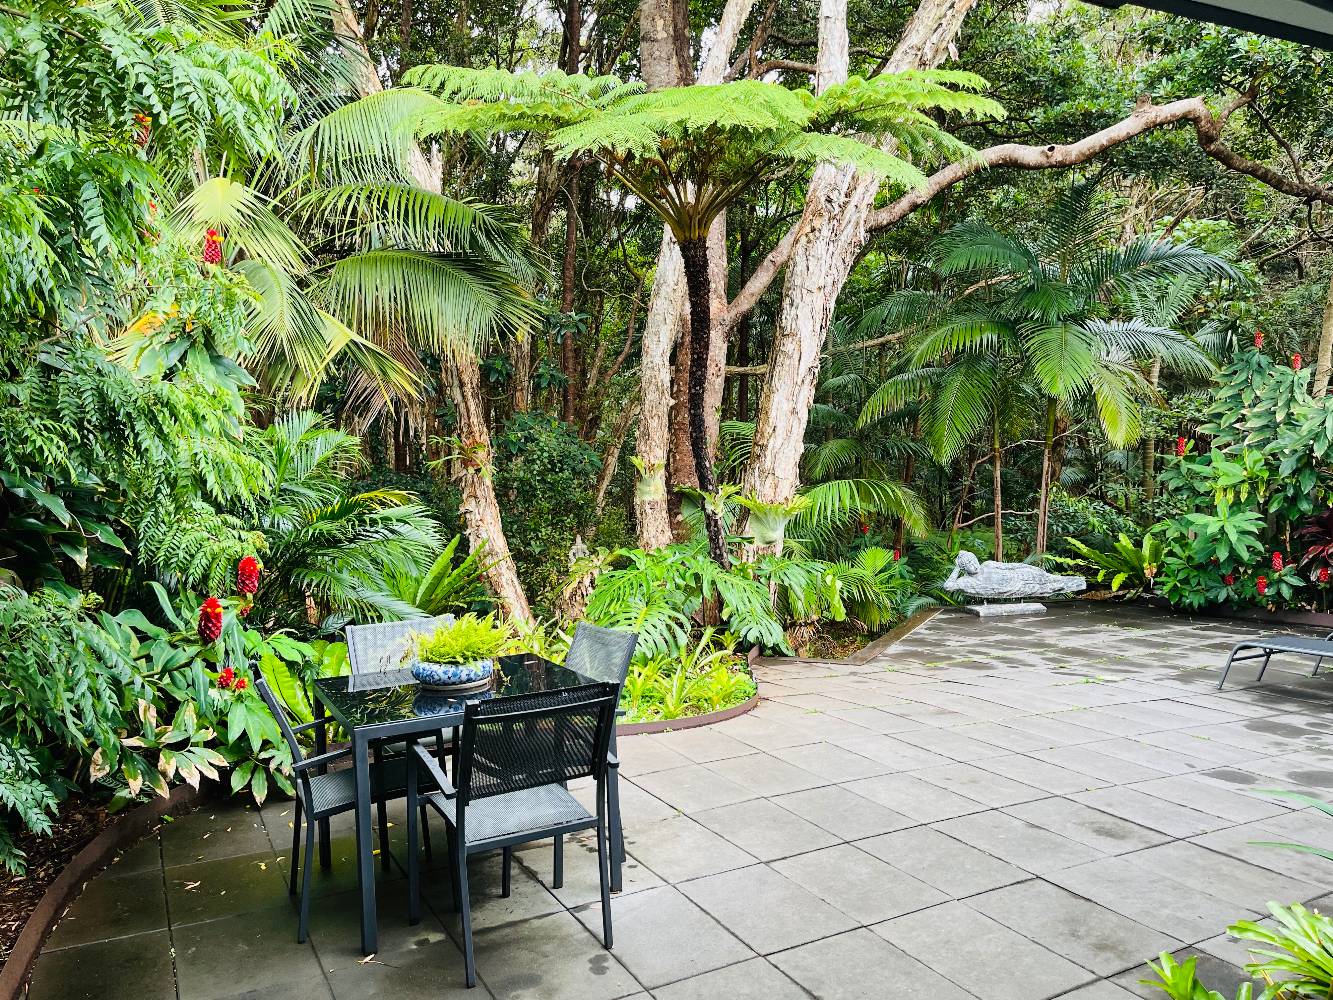 The back yard and rain forest.